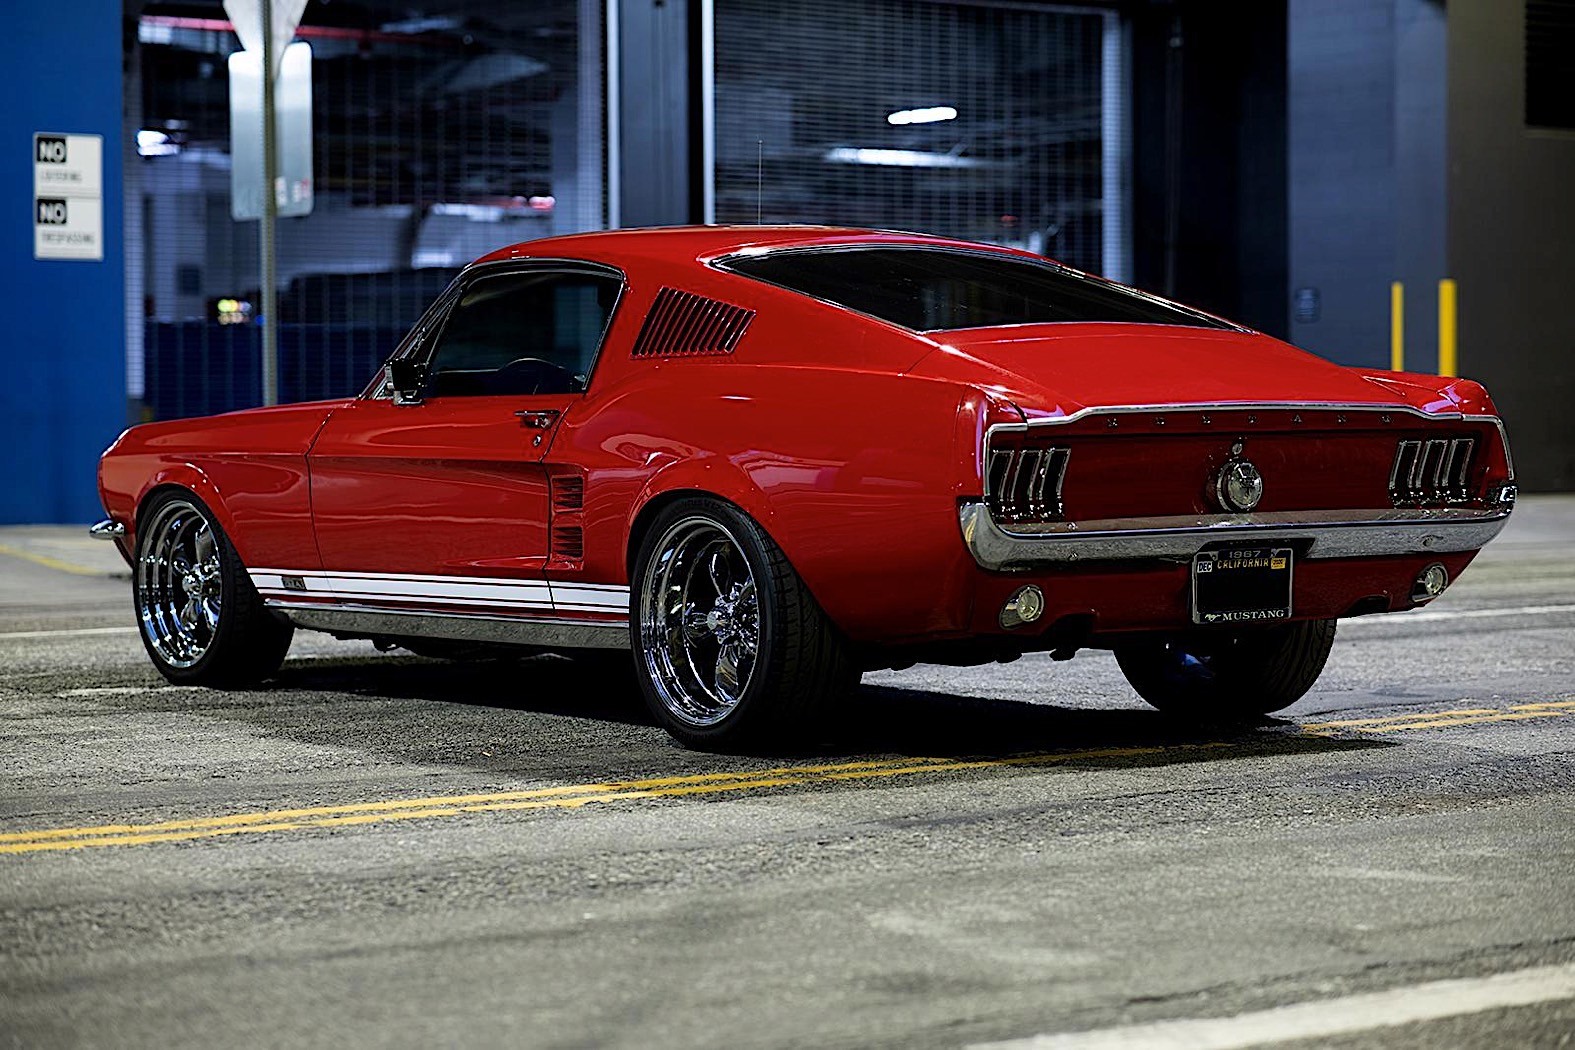 1967 Ford Mustang Stored for 2 Decades Gets Back in the Game With Major ...